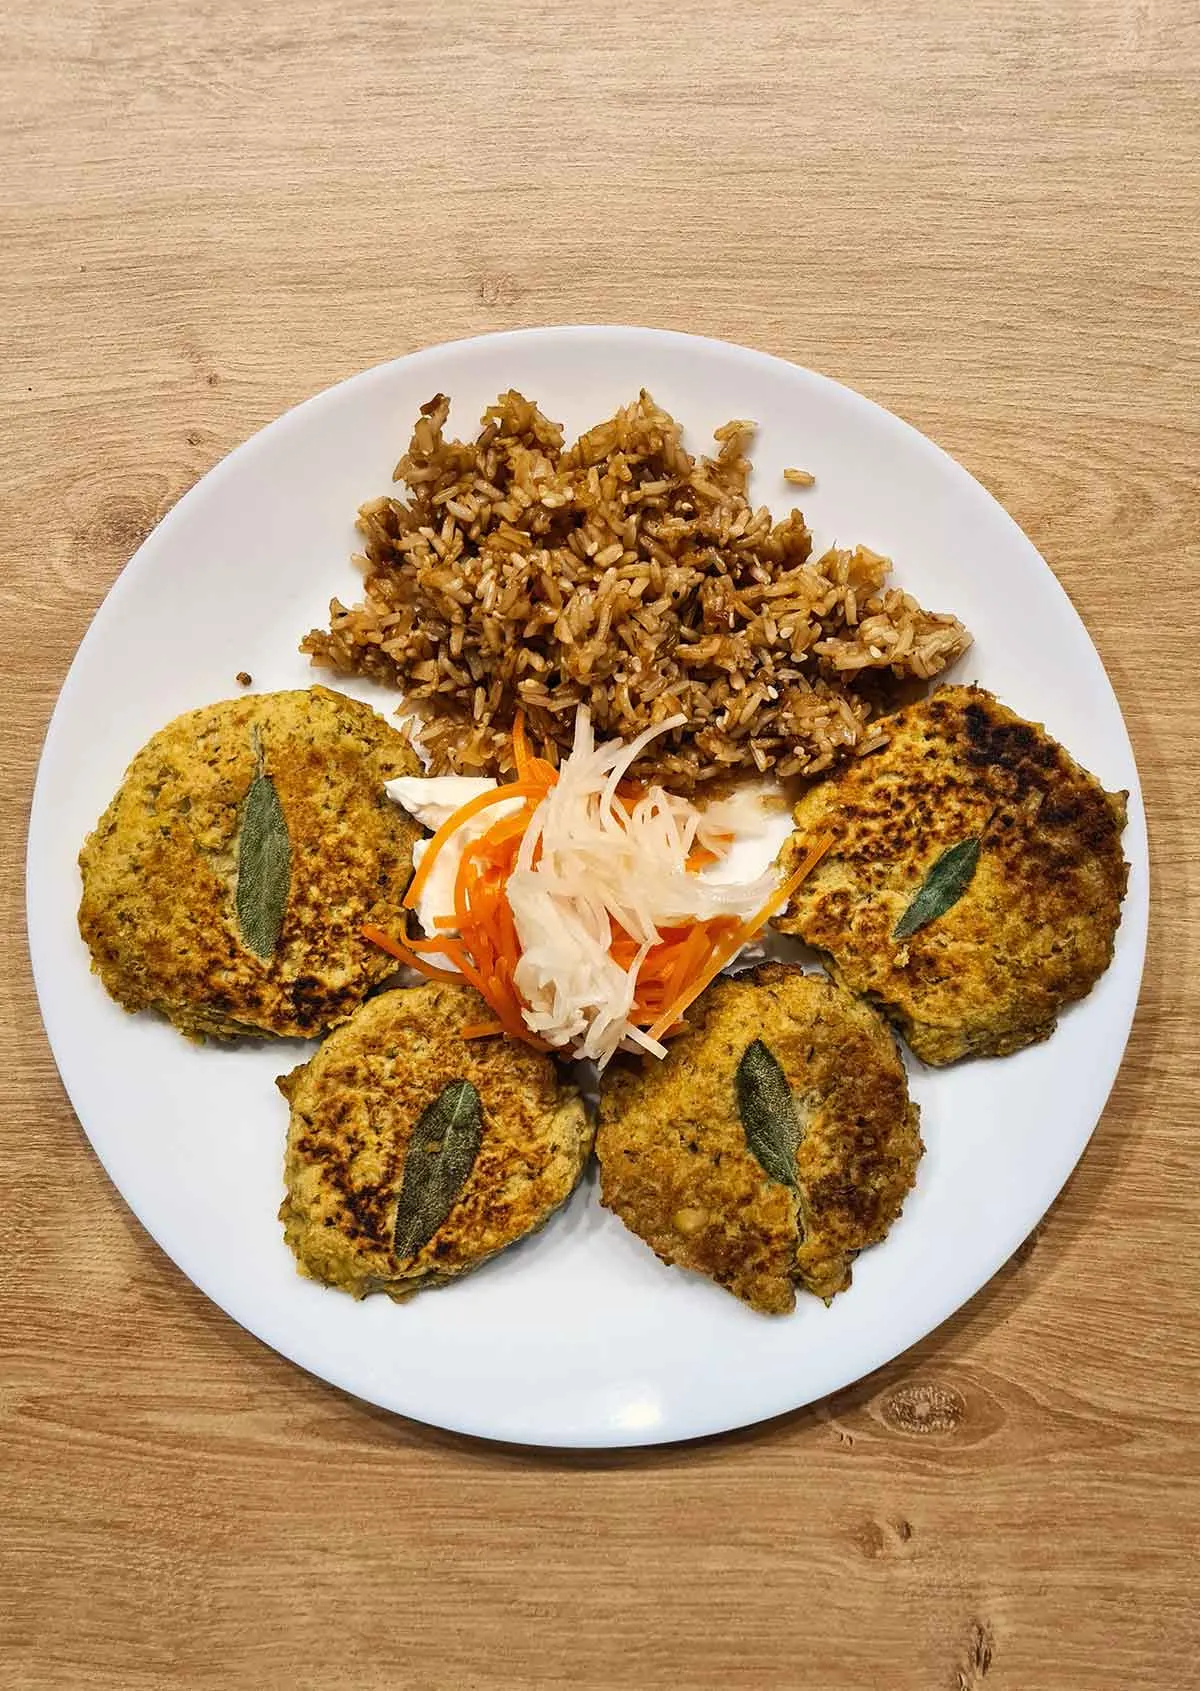 brown rice with yellow peas patties